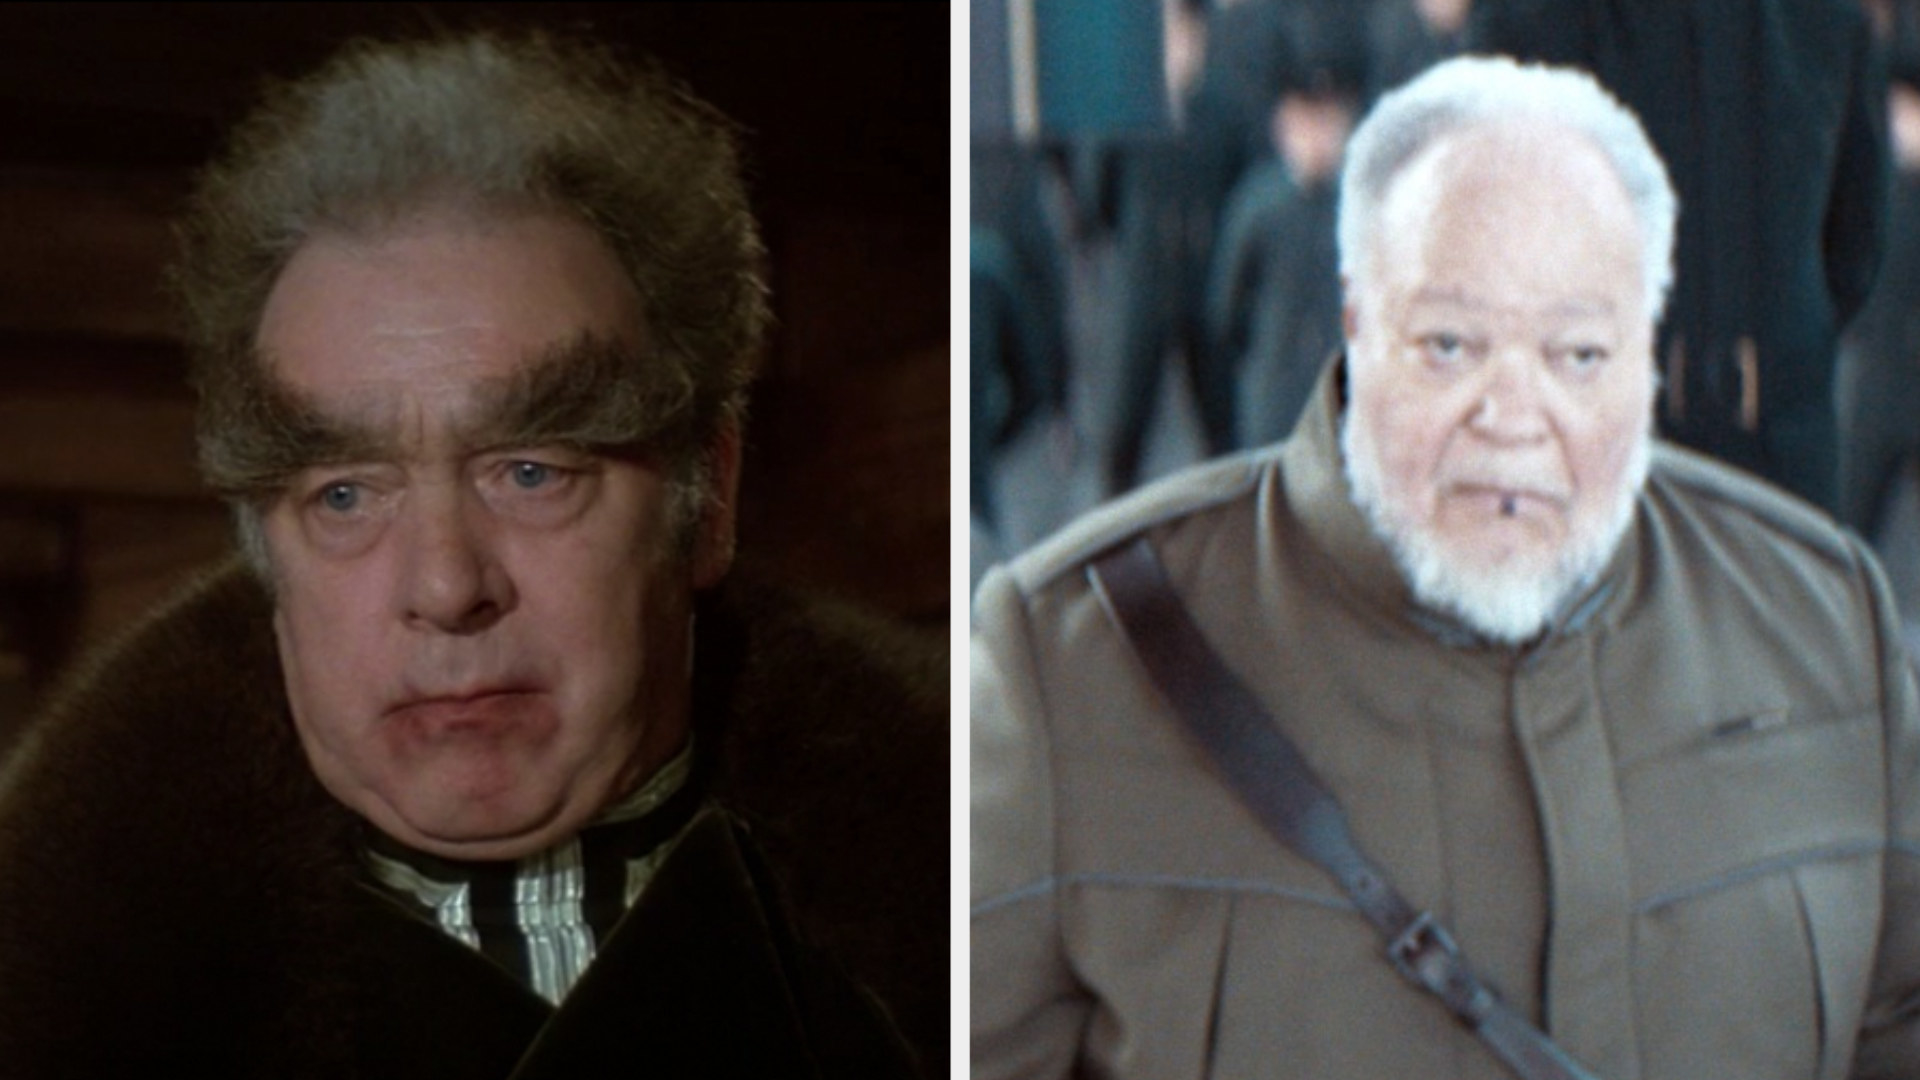 Thufir with overgrown eyebrows and Stephen McKinley Henderson as Thufir with short eyebrows with a white hair and beard